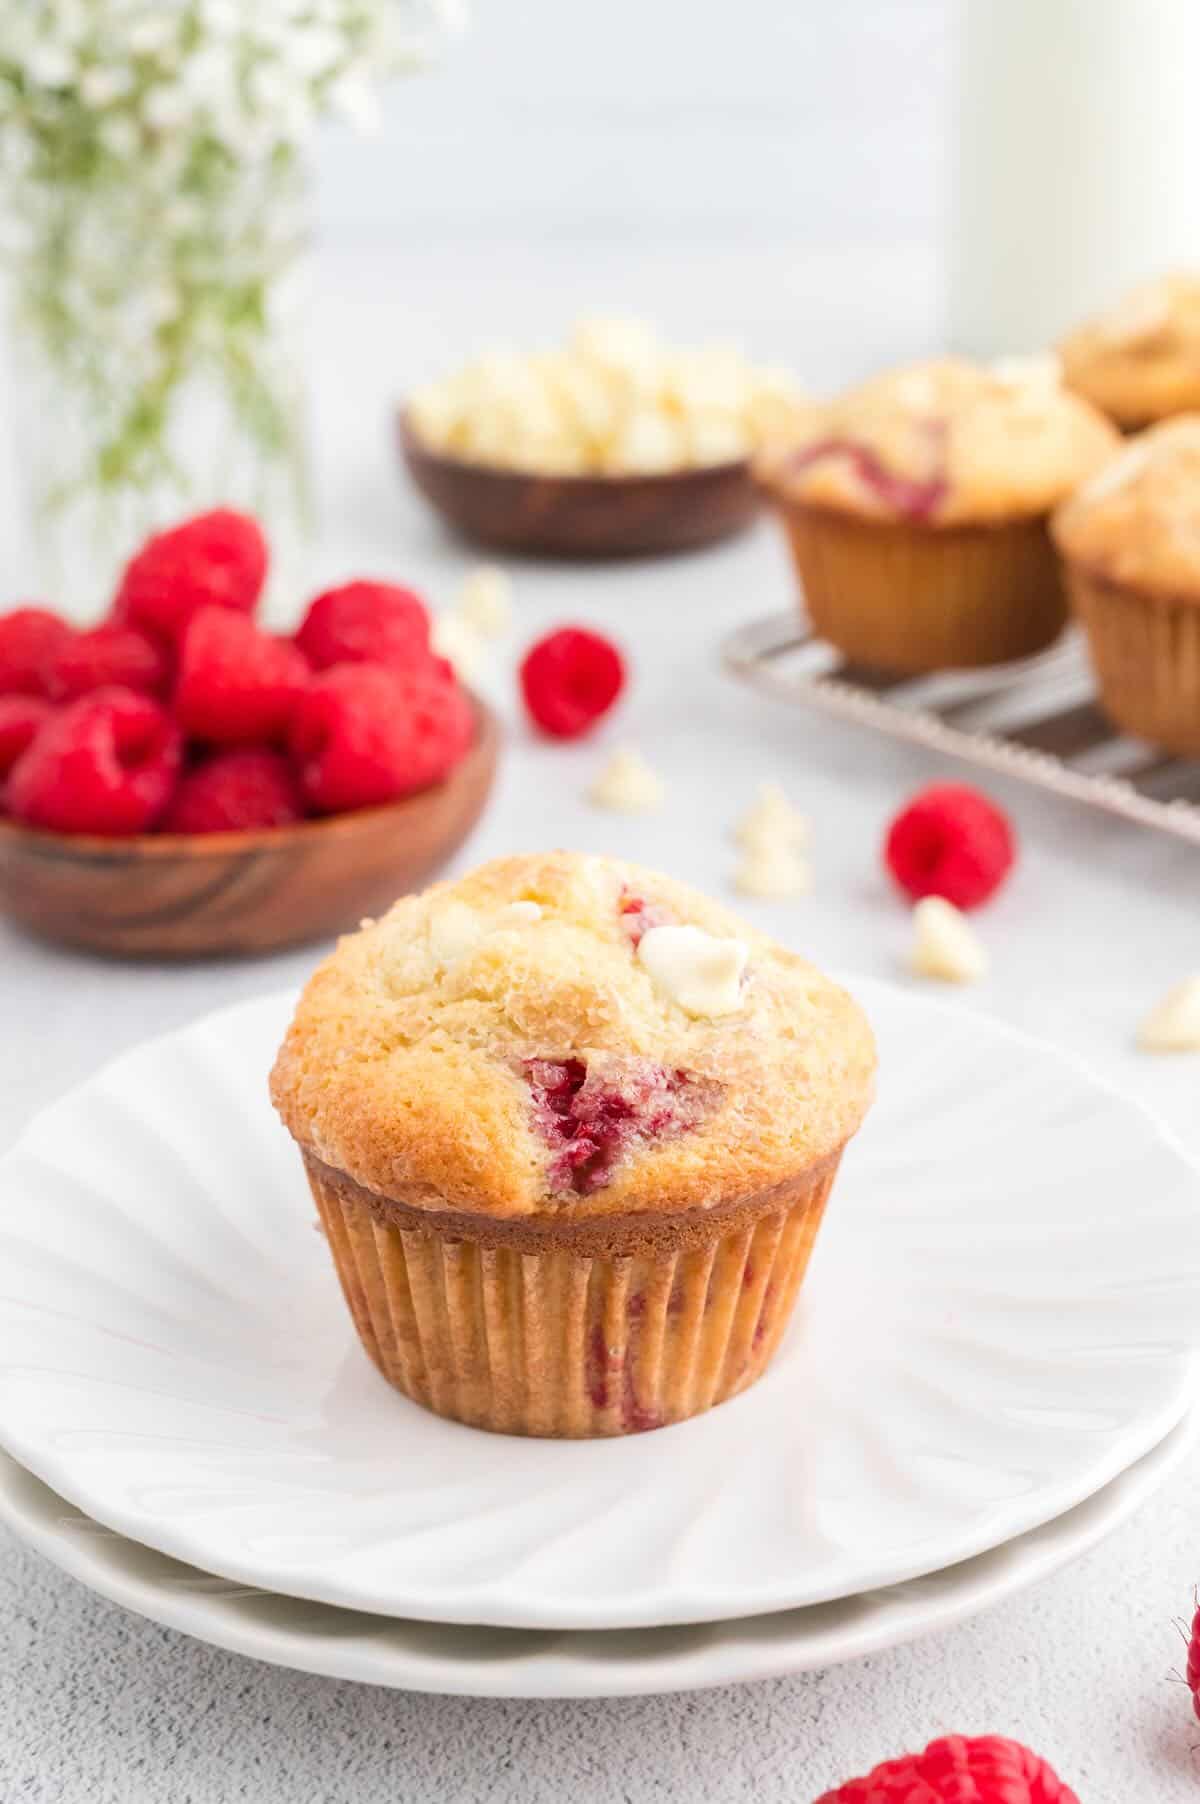 A raspberry white chocolate chip muffin on a stack of white fluted plates. A silver cooling rack with more muffins is in the background, along with wooden dishes of raspberries and white chocolate chips.